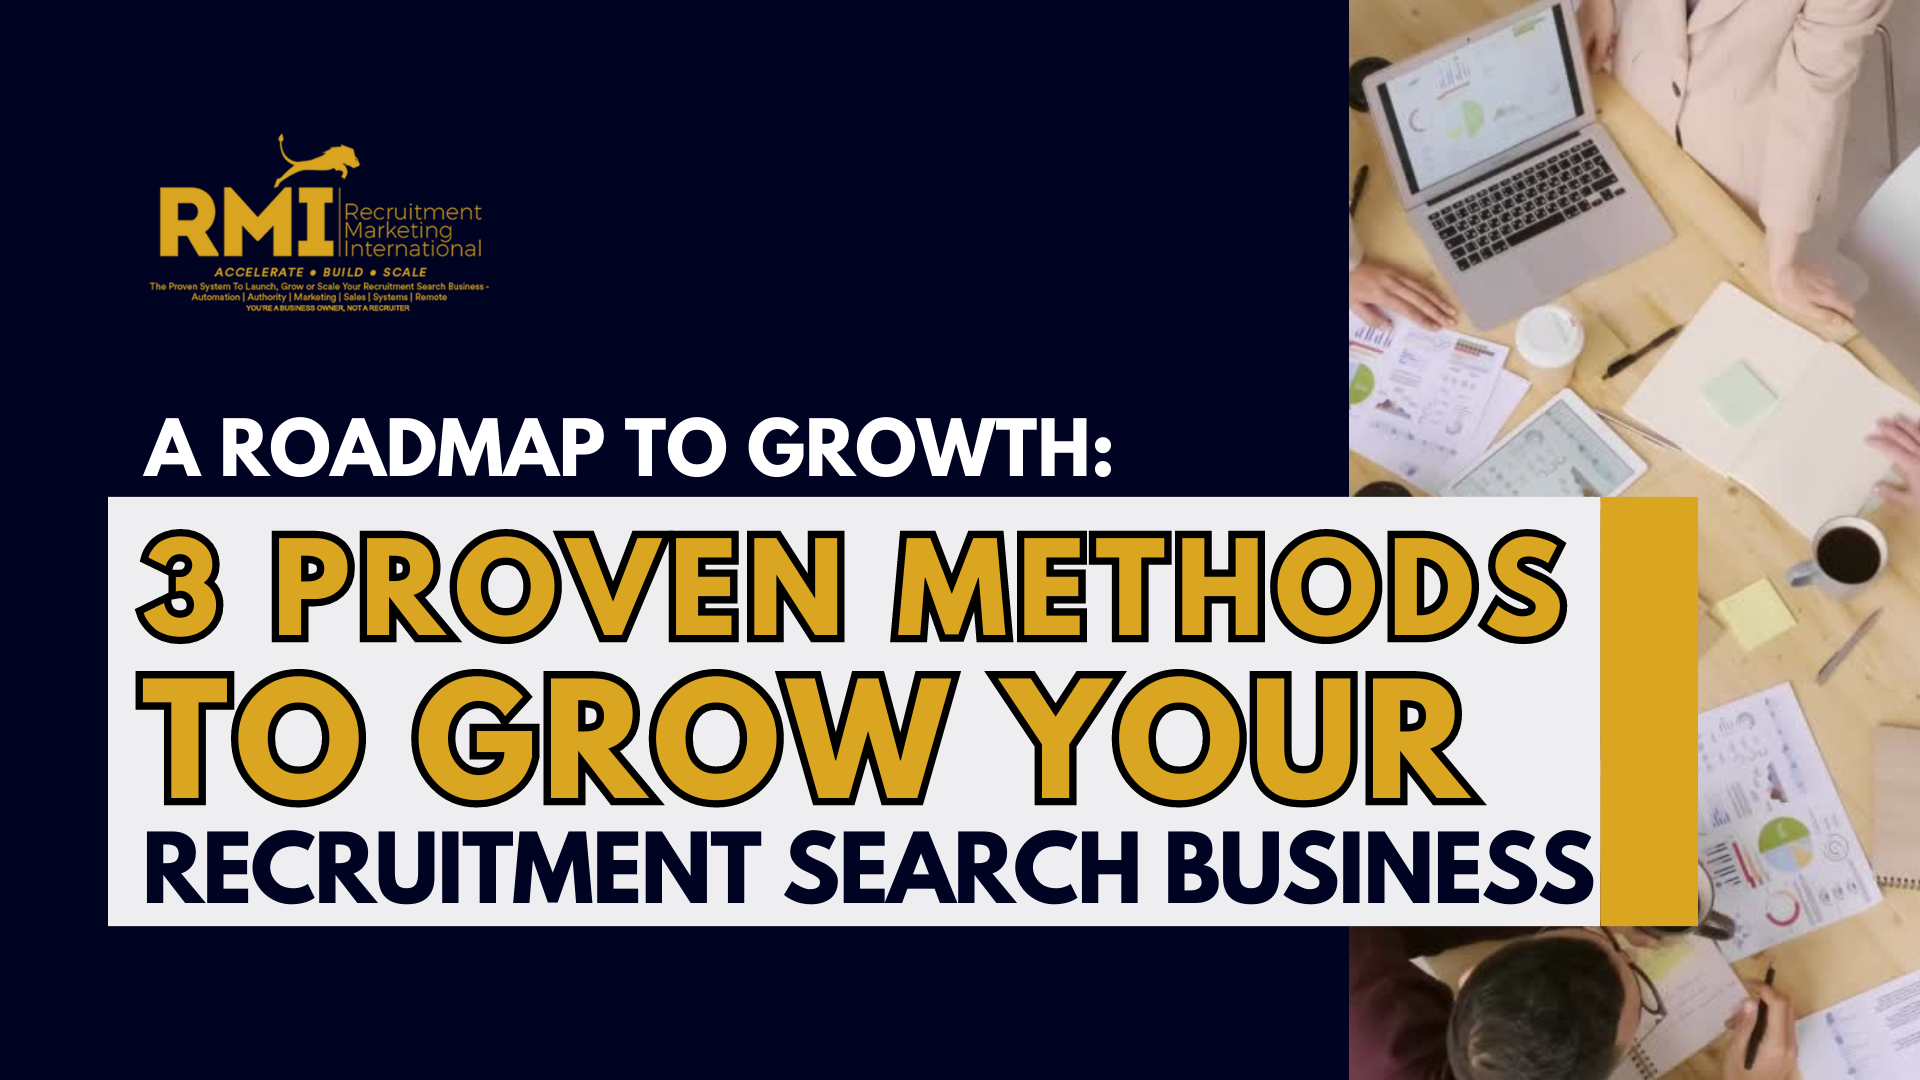 PODCAST 241 – A ROADMAP TO GROWTH: 3 PROVEN METHODS TO GROW YOUR RECRUITMENT SEARCH BUSINESS